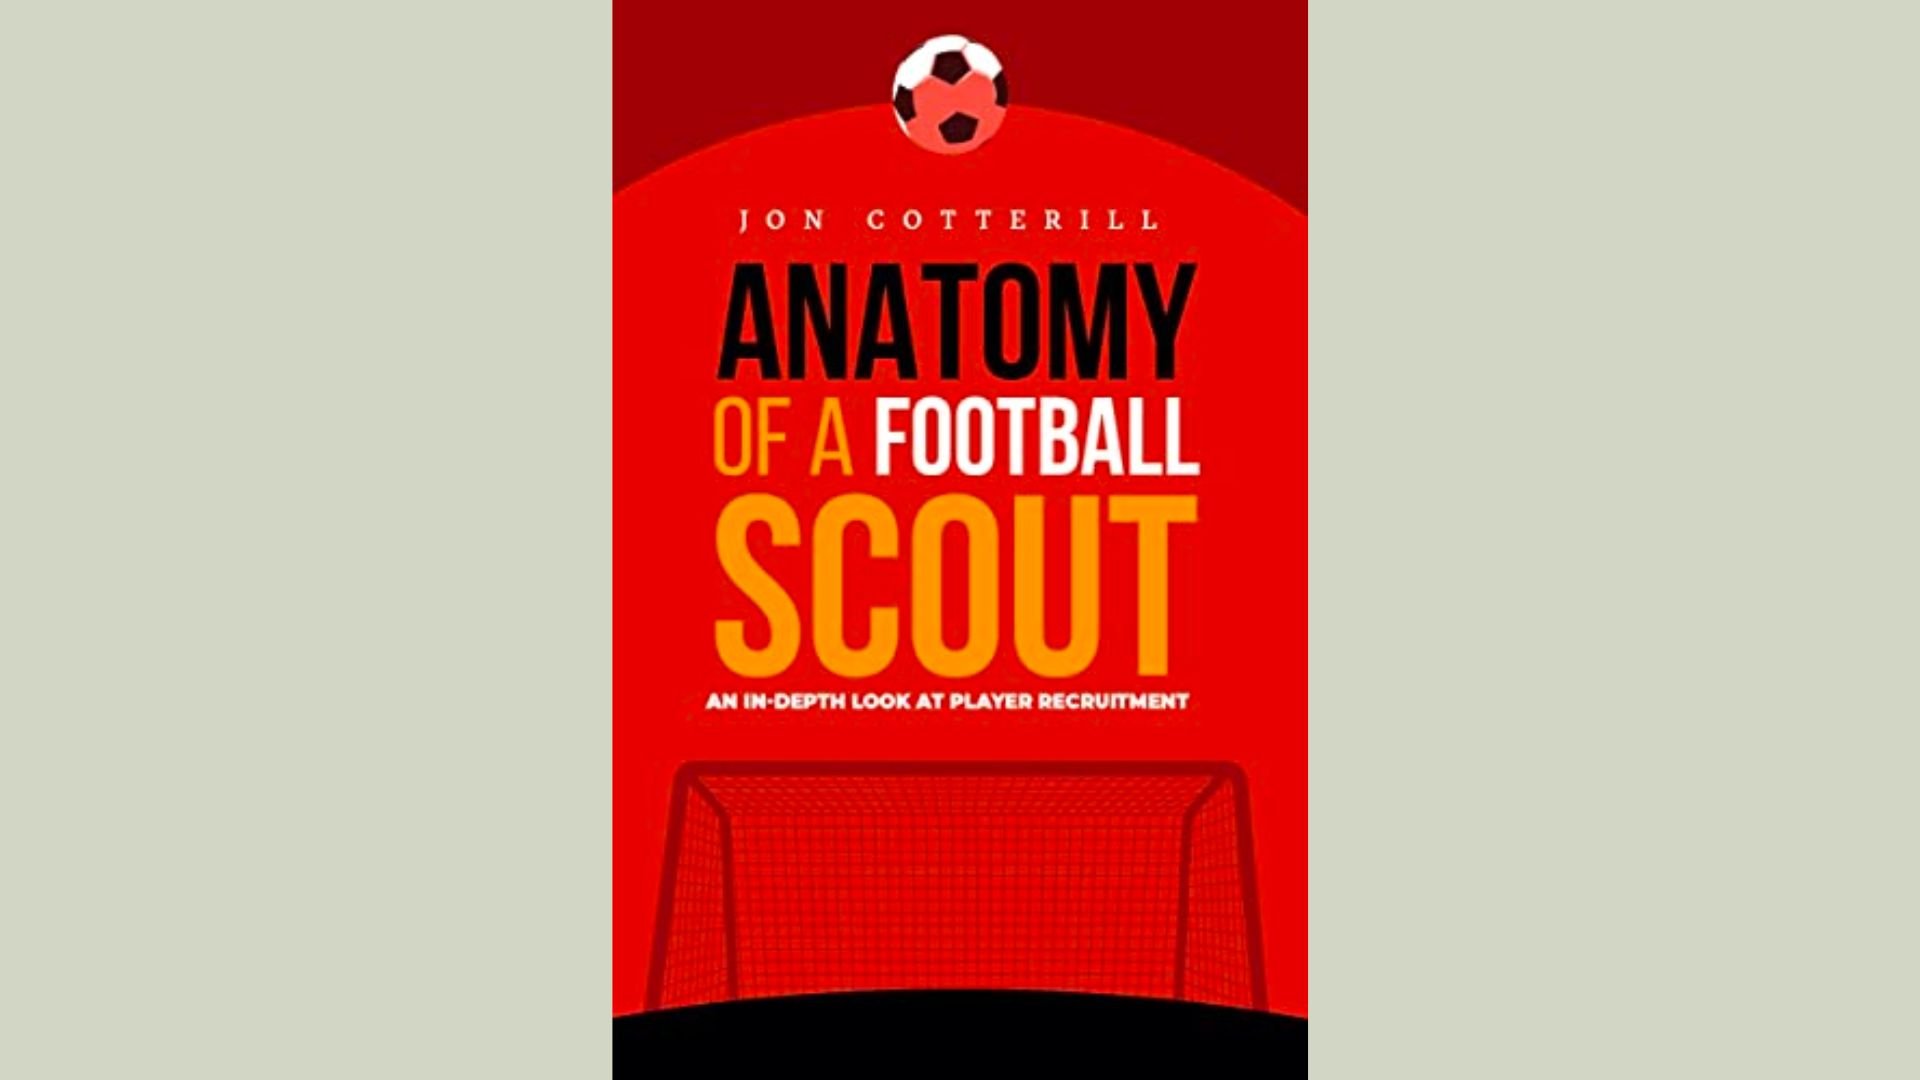 Anatomy of a Football Scout (Jon Cotterill) - Book Summary, Notes & Highlights